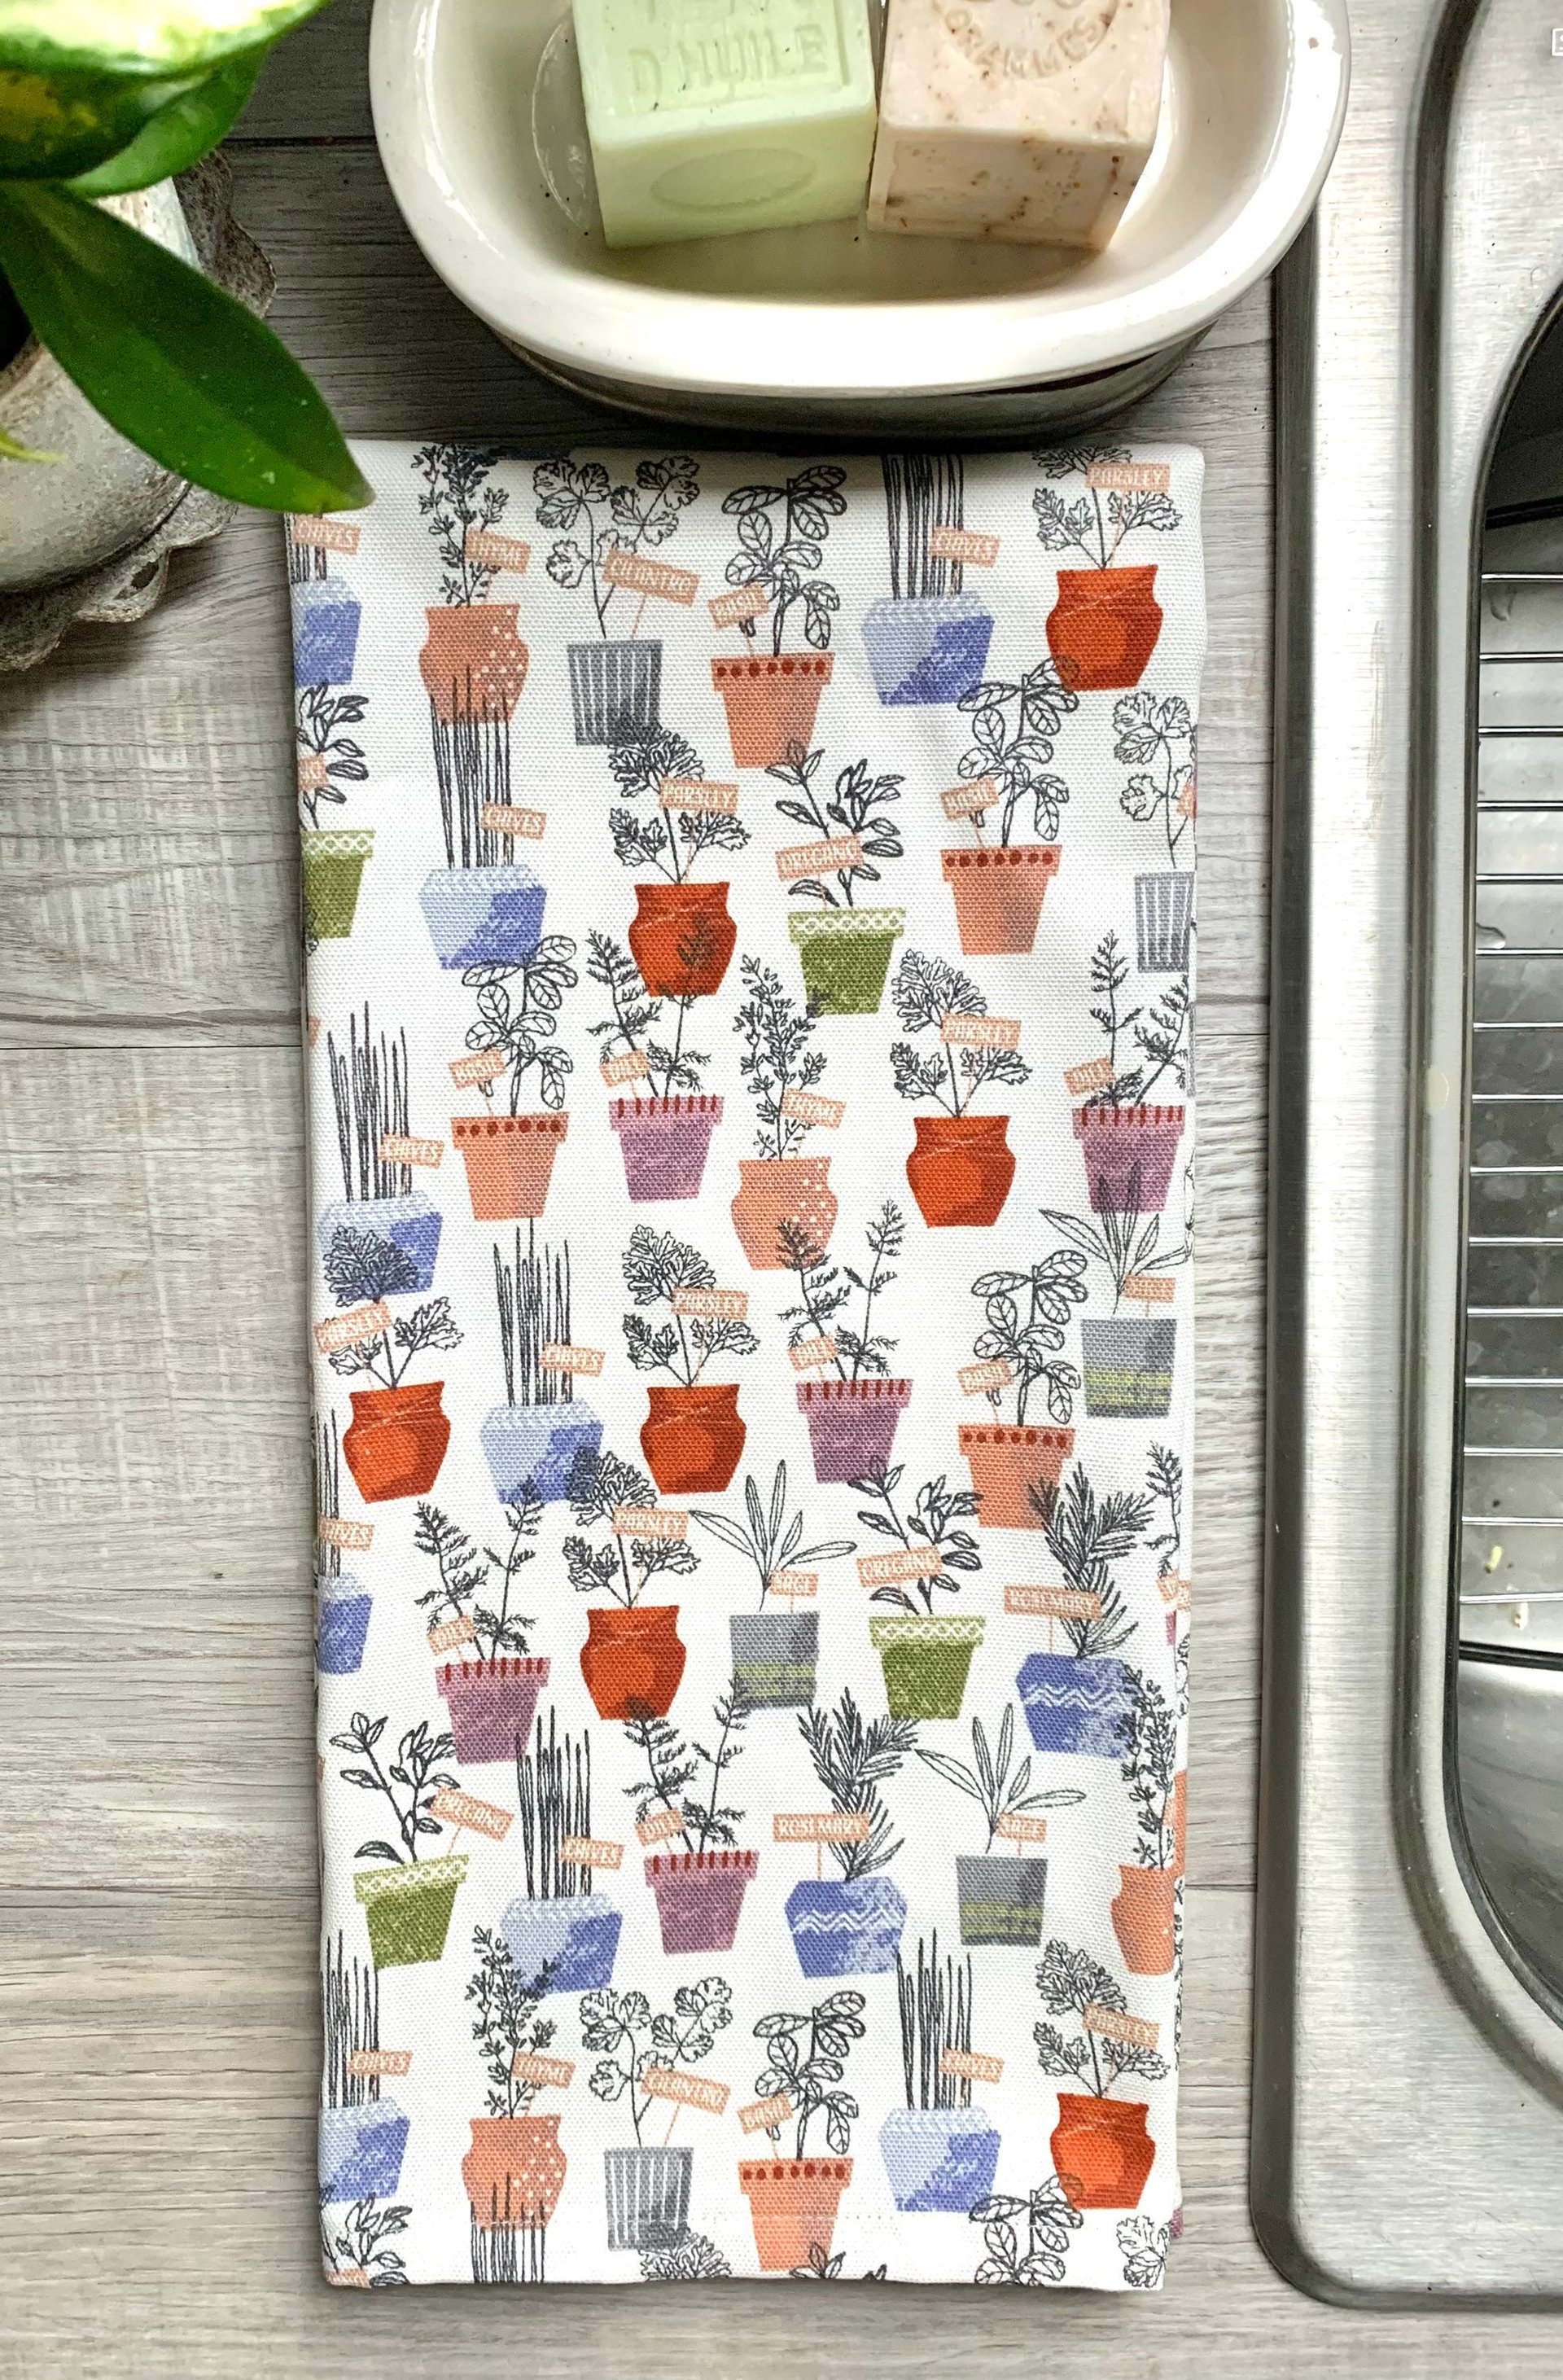 Potted Herbs Chef Towel || Herb Lover Kitchen Towel || Flour Sack Towels